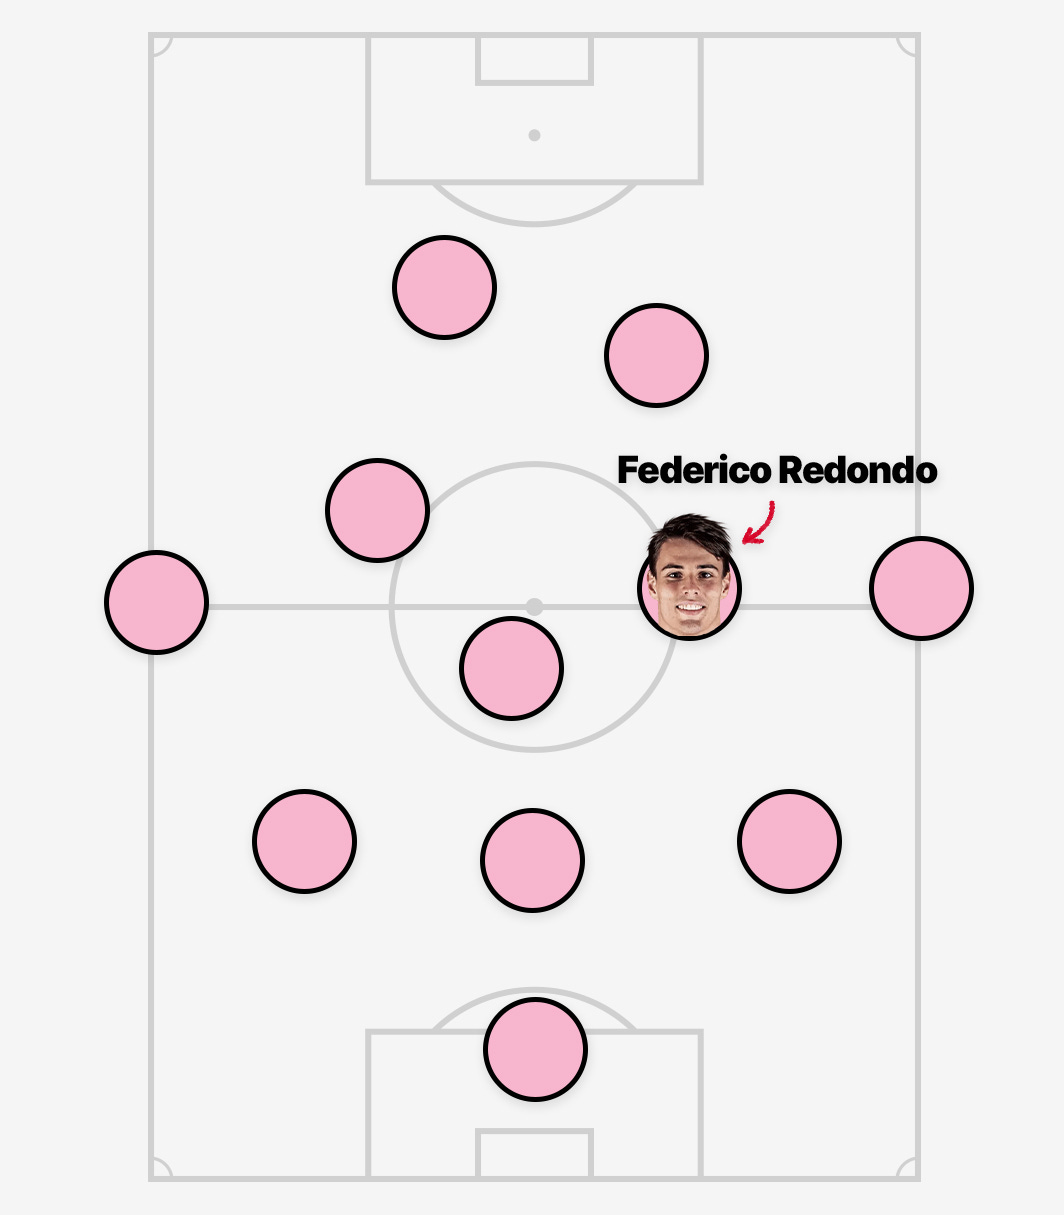 A graphic showing Inter Miami's typical 3-5-2 shape with Federico Redondo as a RCM